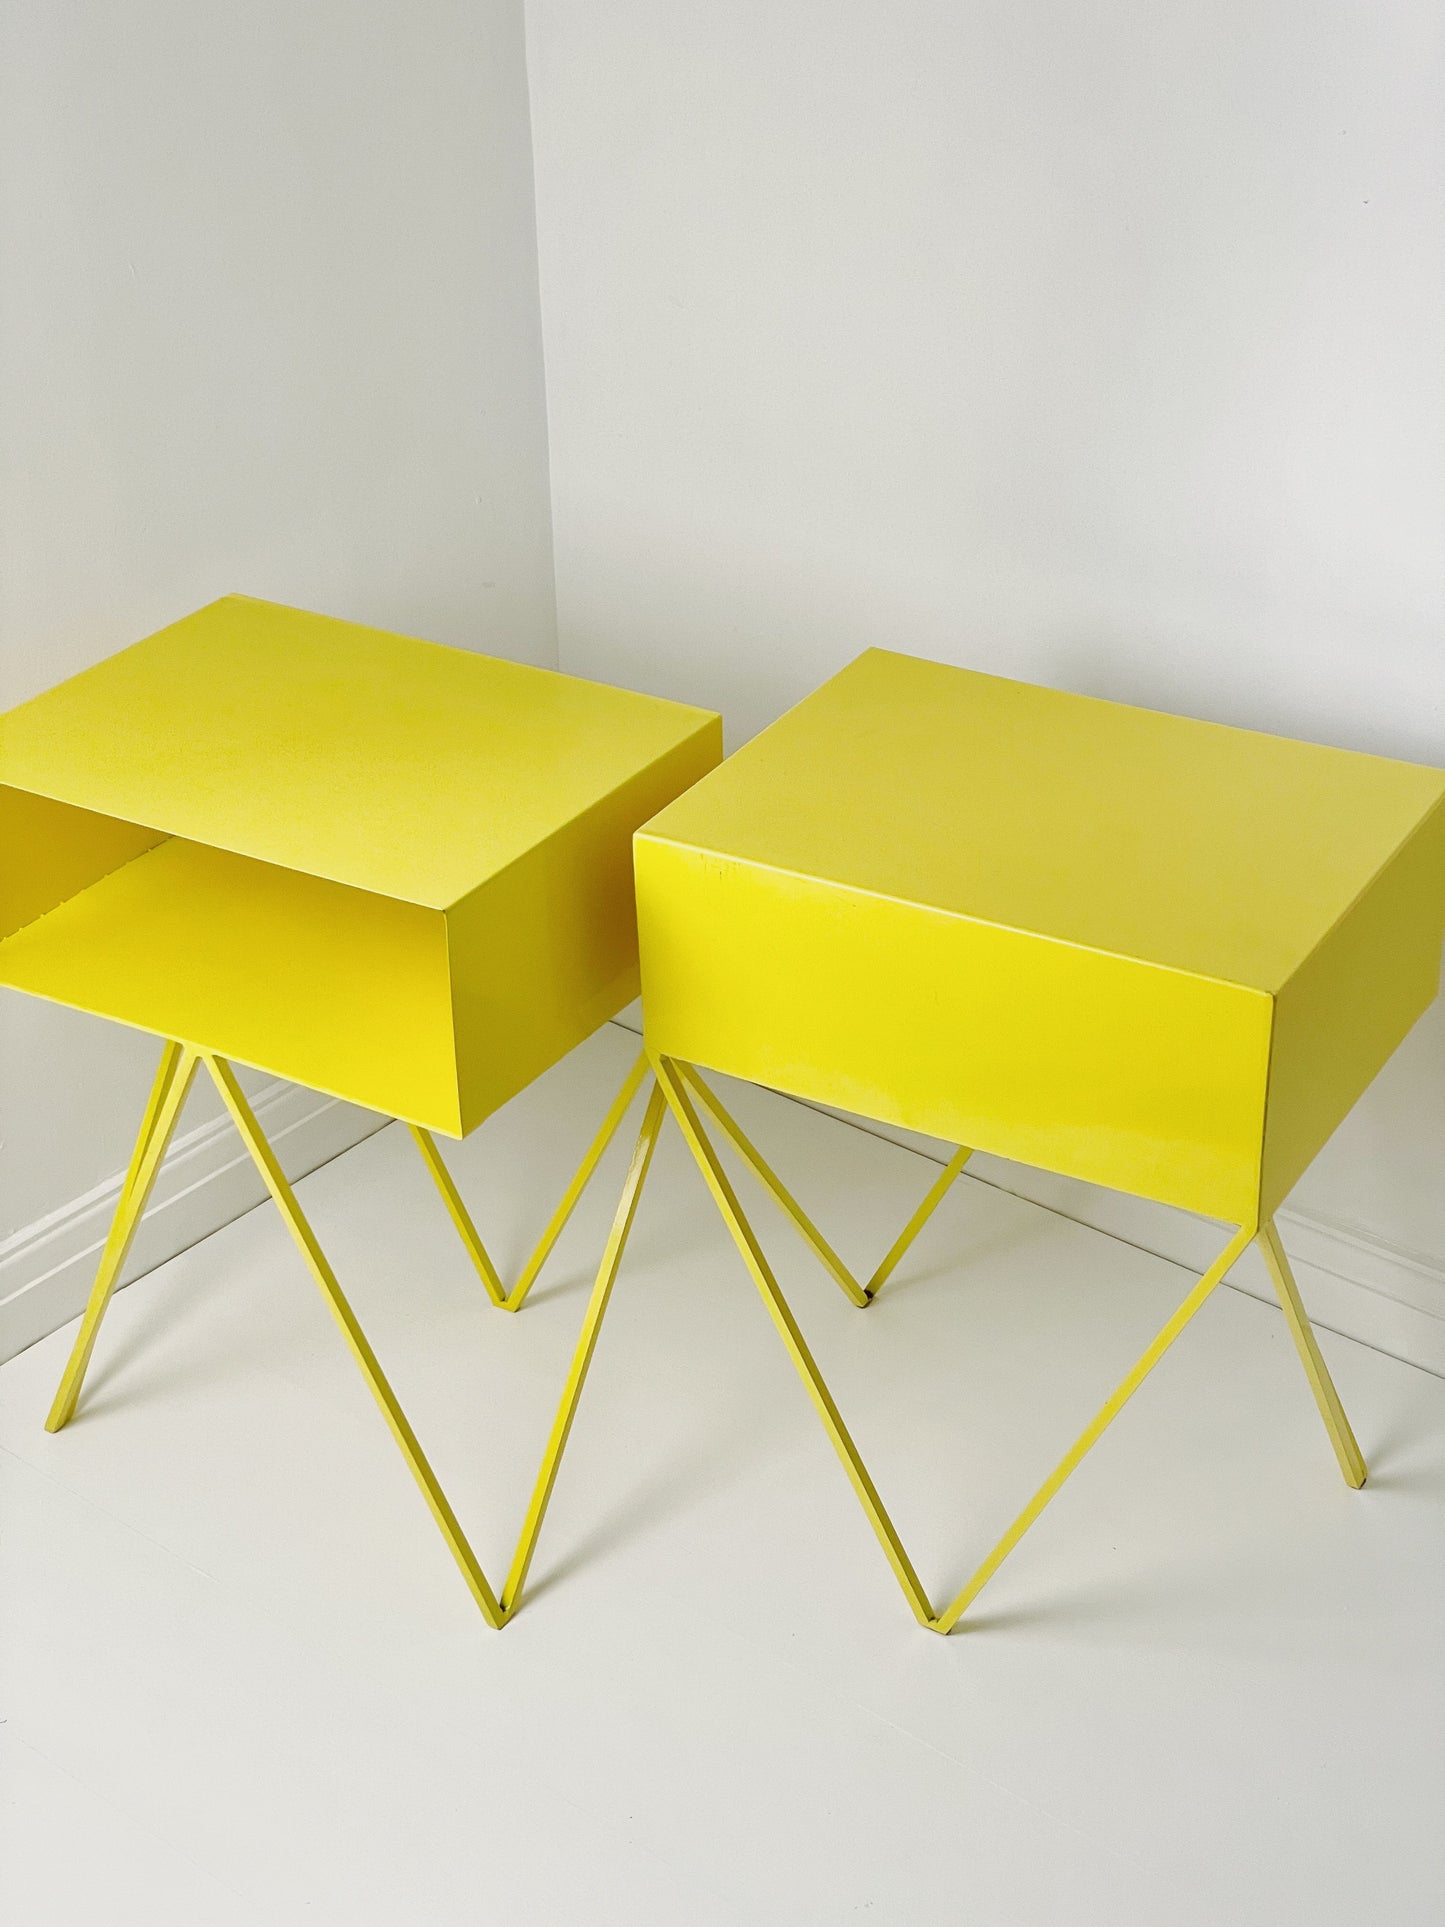 Yellow industrial metal side table